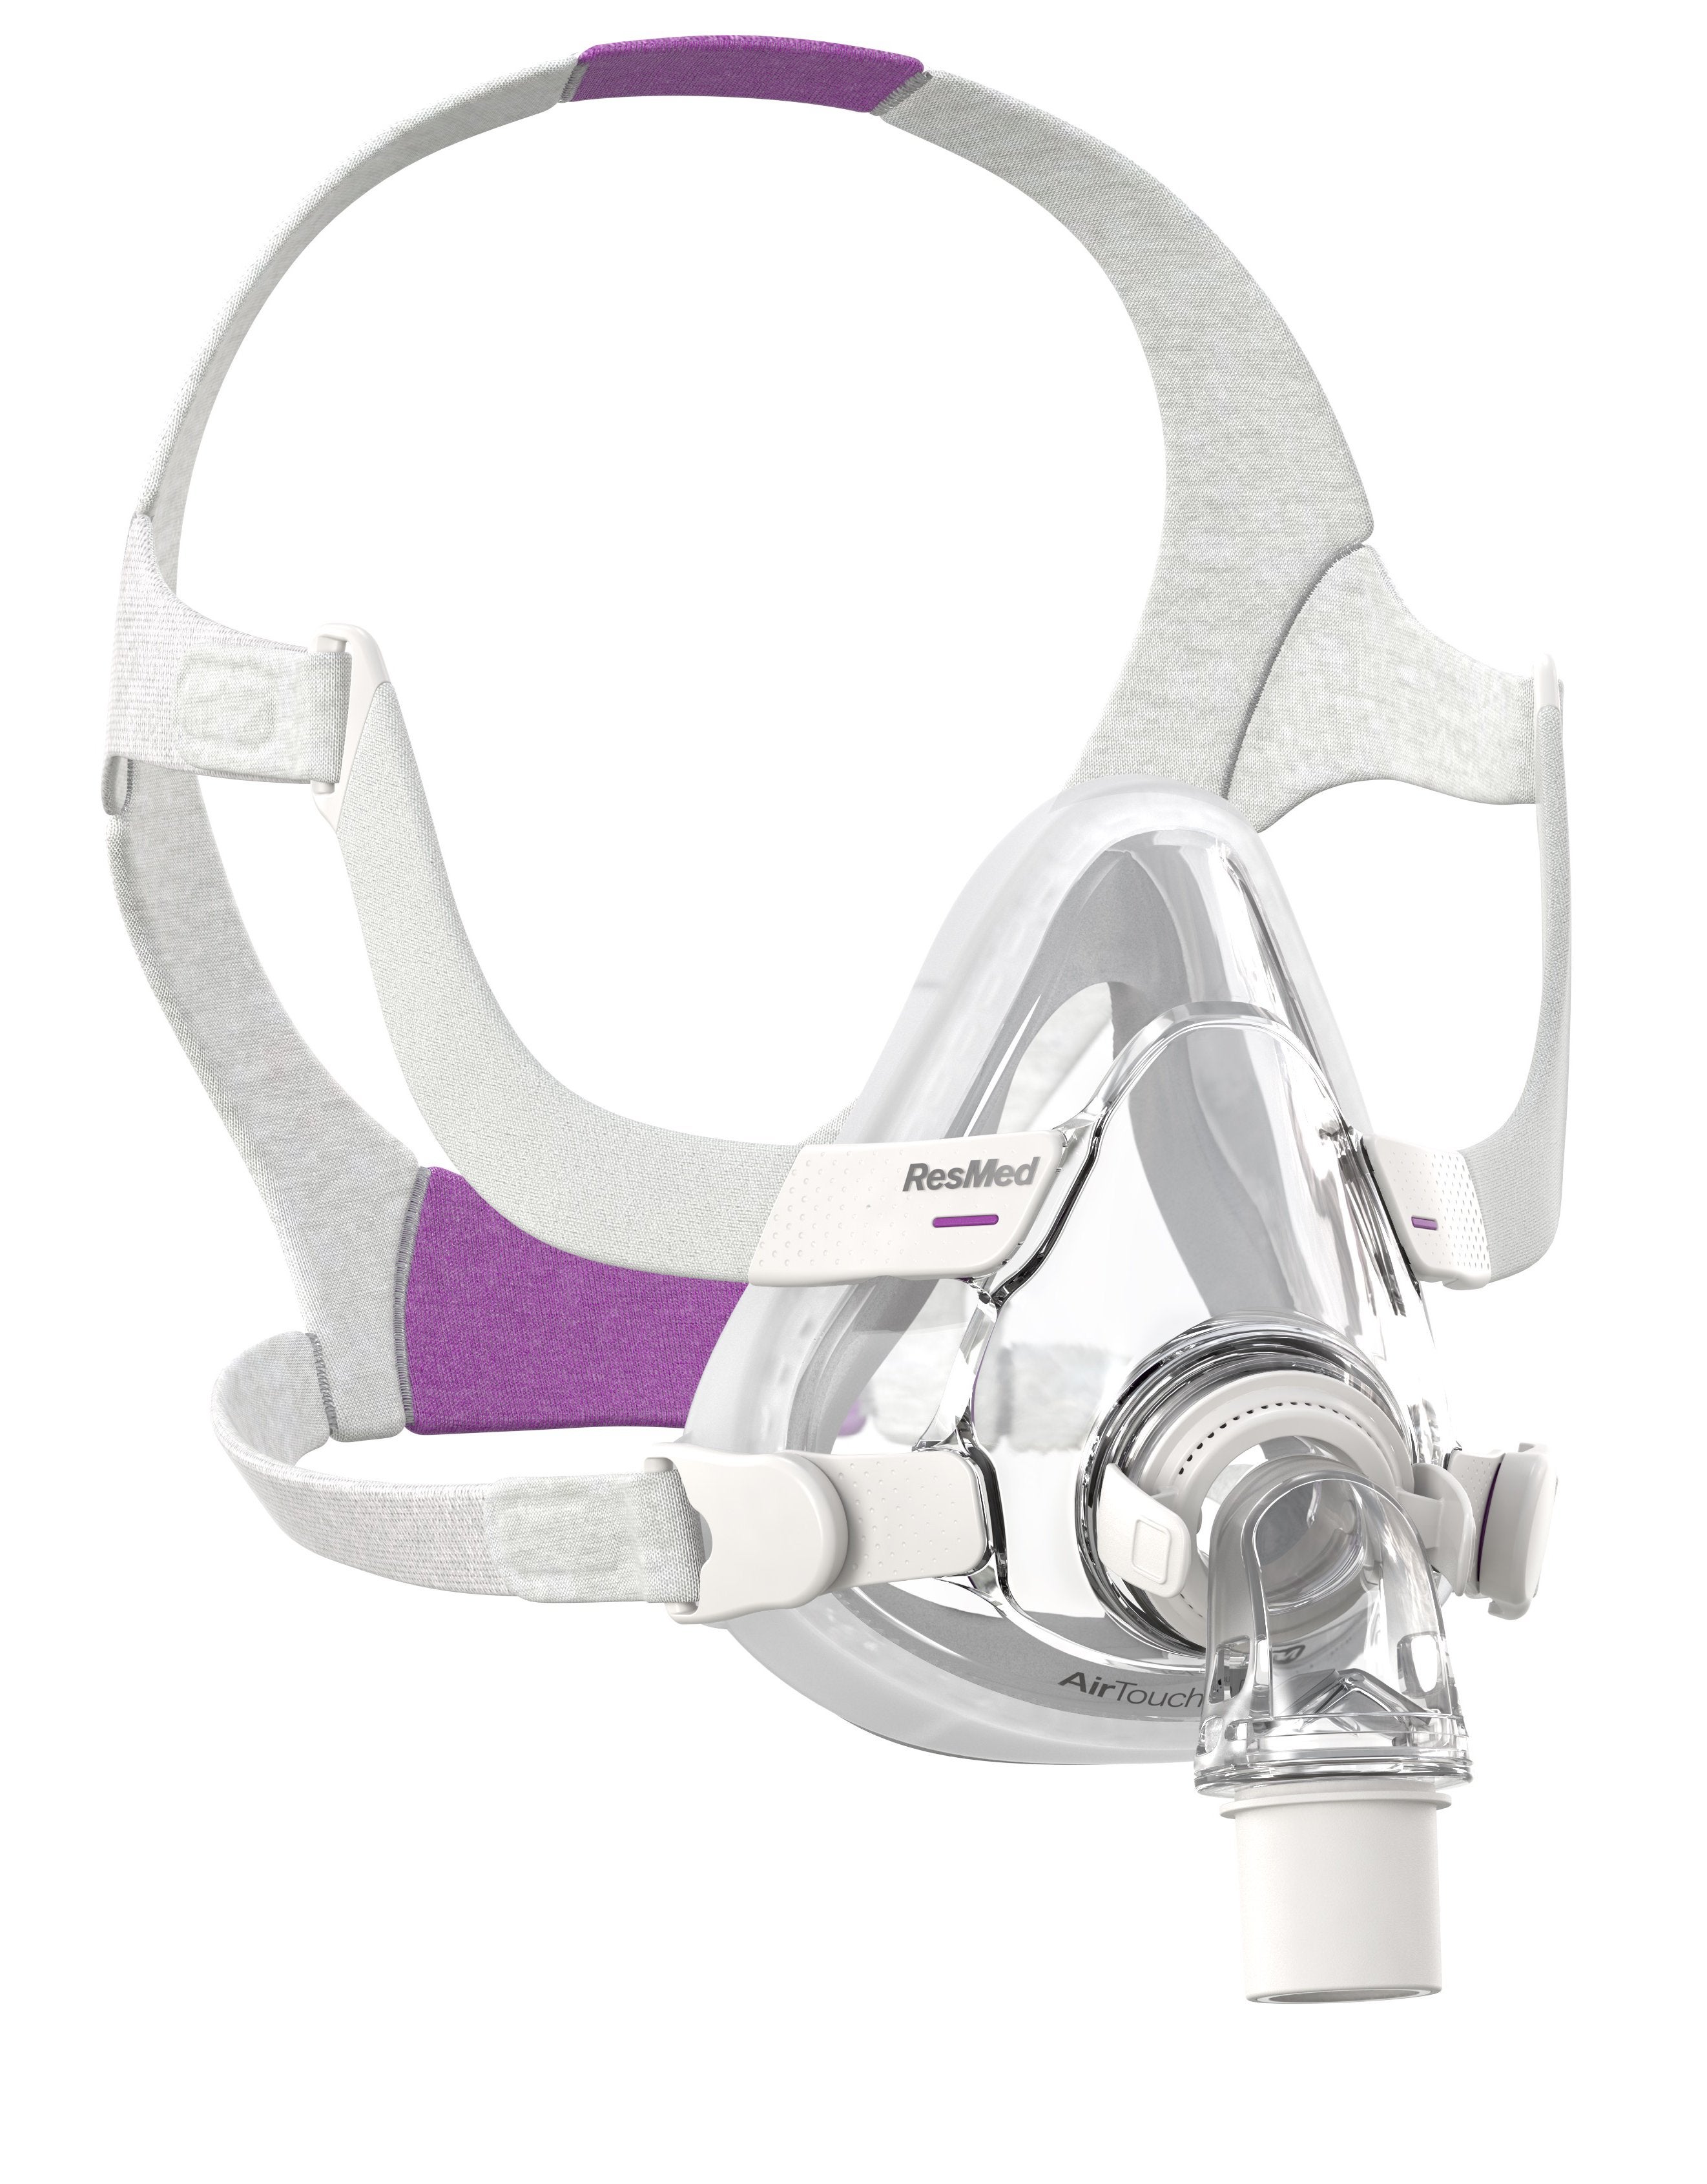 Resmed Airtouch™ F20 For Her Full Face Cpap Mask With Headgear 4270